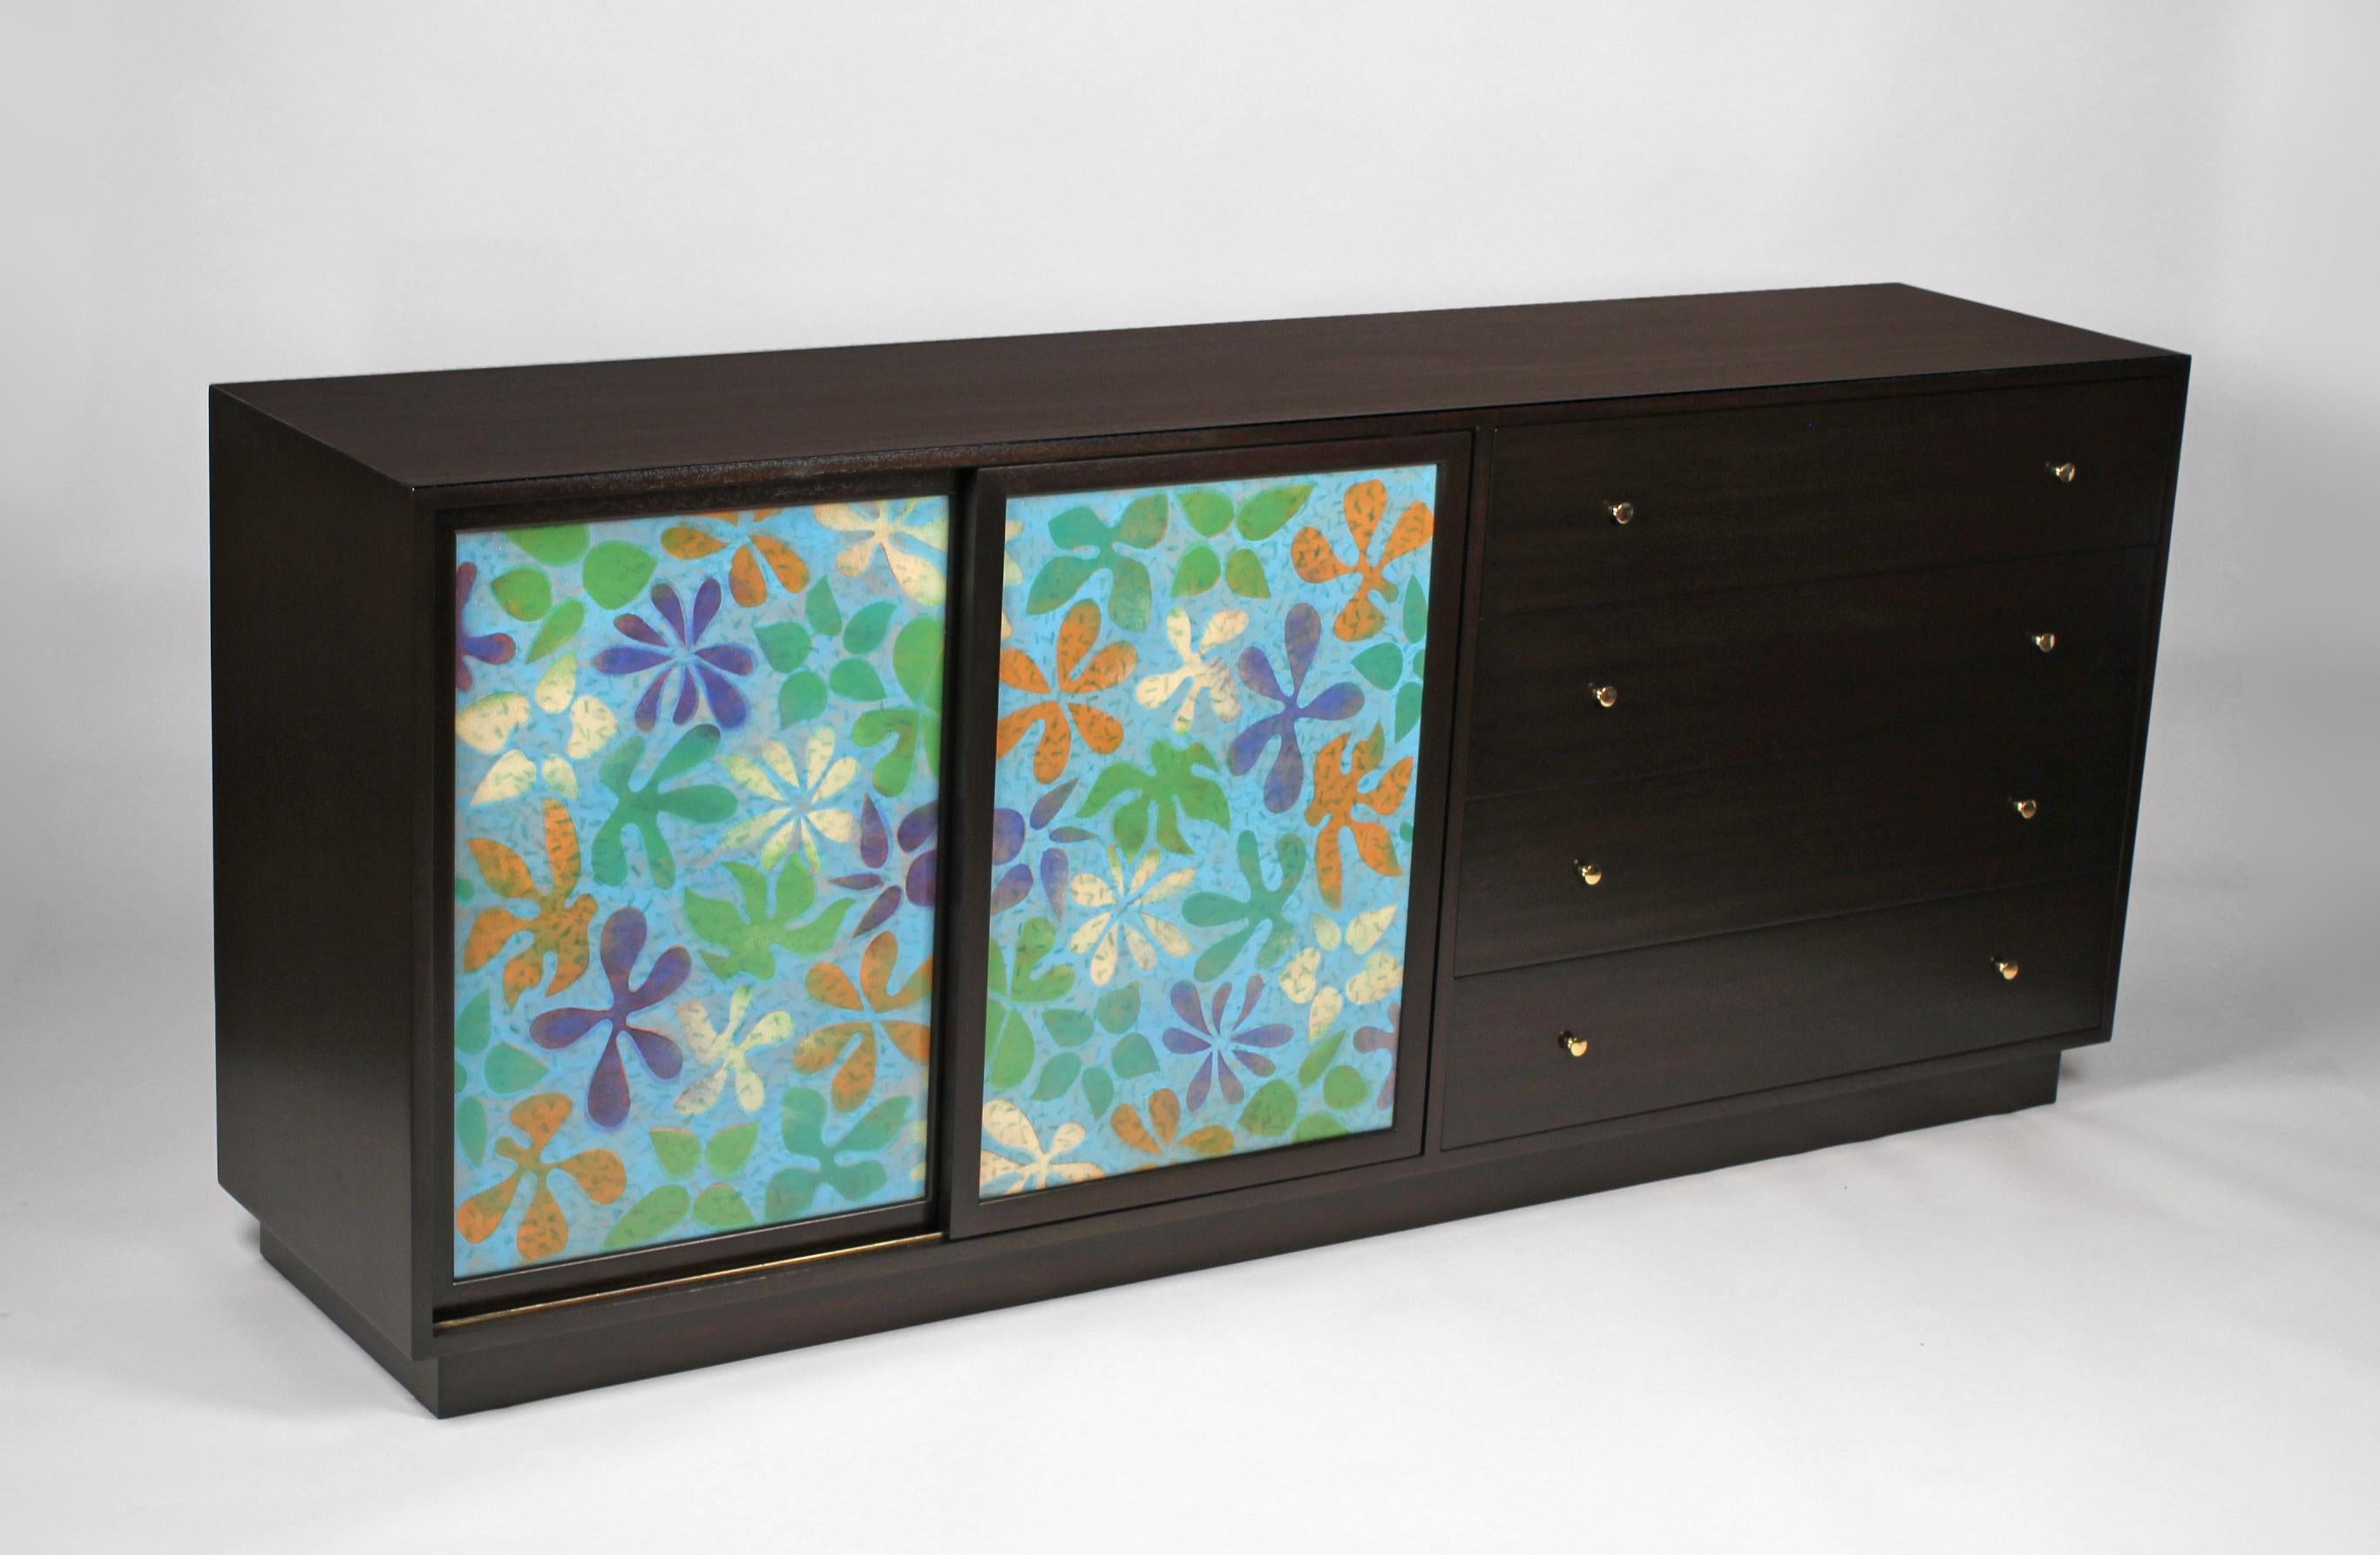 Cabinet or dresser designed by Harvey Probber. Cabinet has high-fired enamel-on-copper doors with a floral decorative motif and are in excellent condition. The dark mahogany case has four exterior drawers with brass pulls. The sliding enameled doors